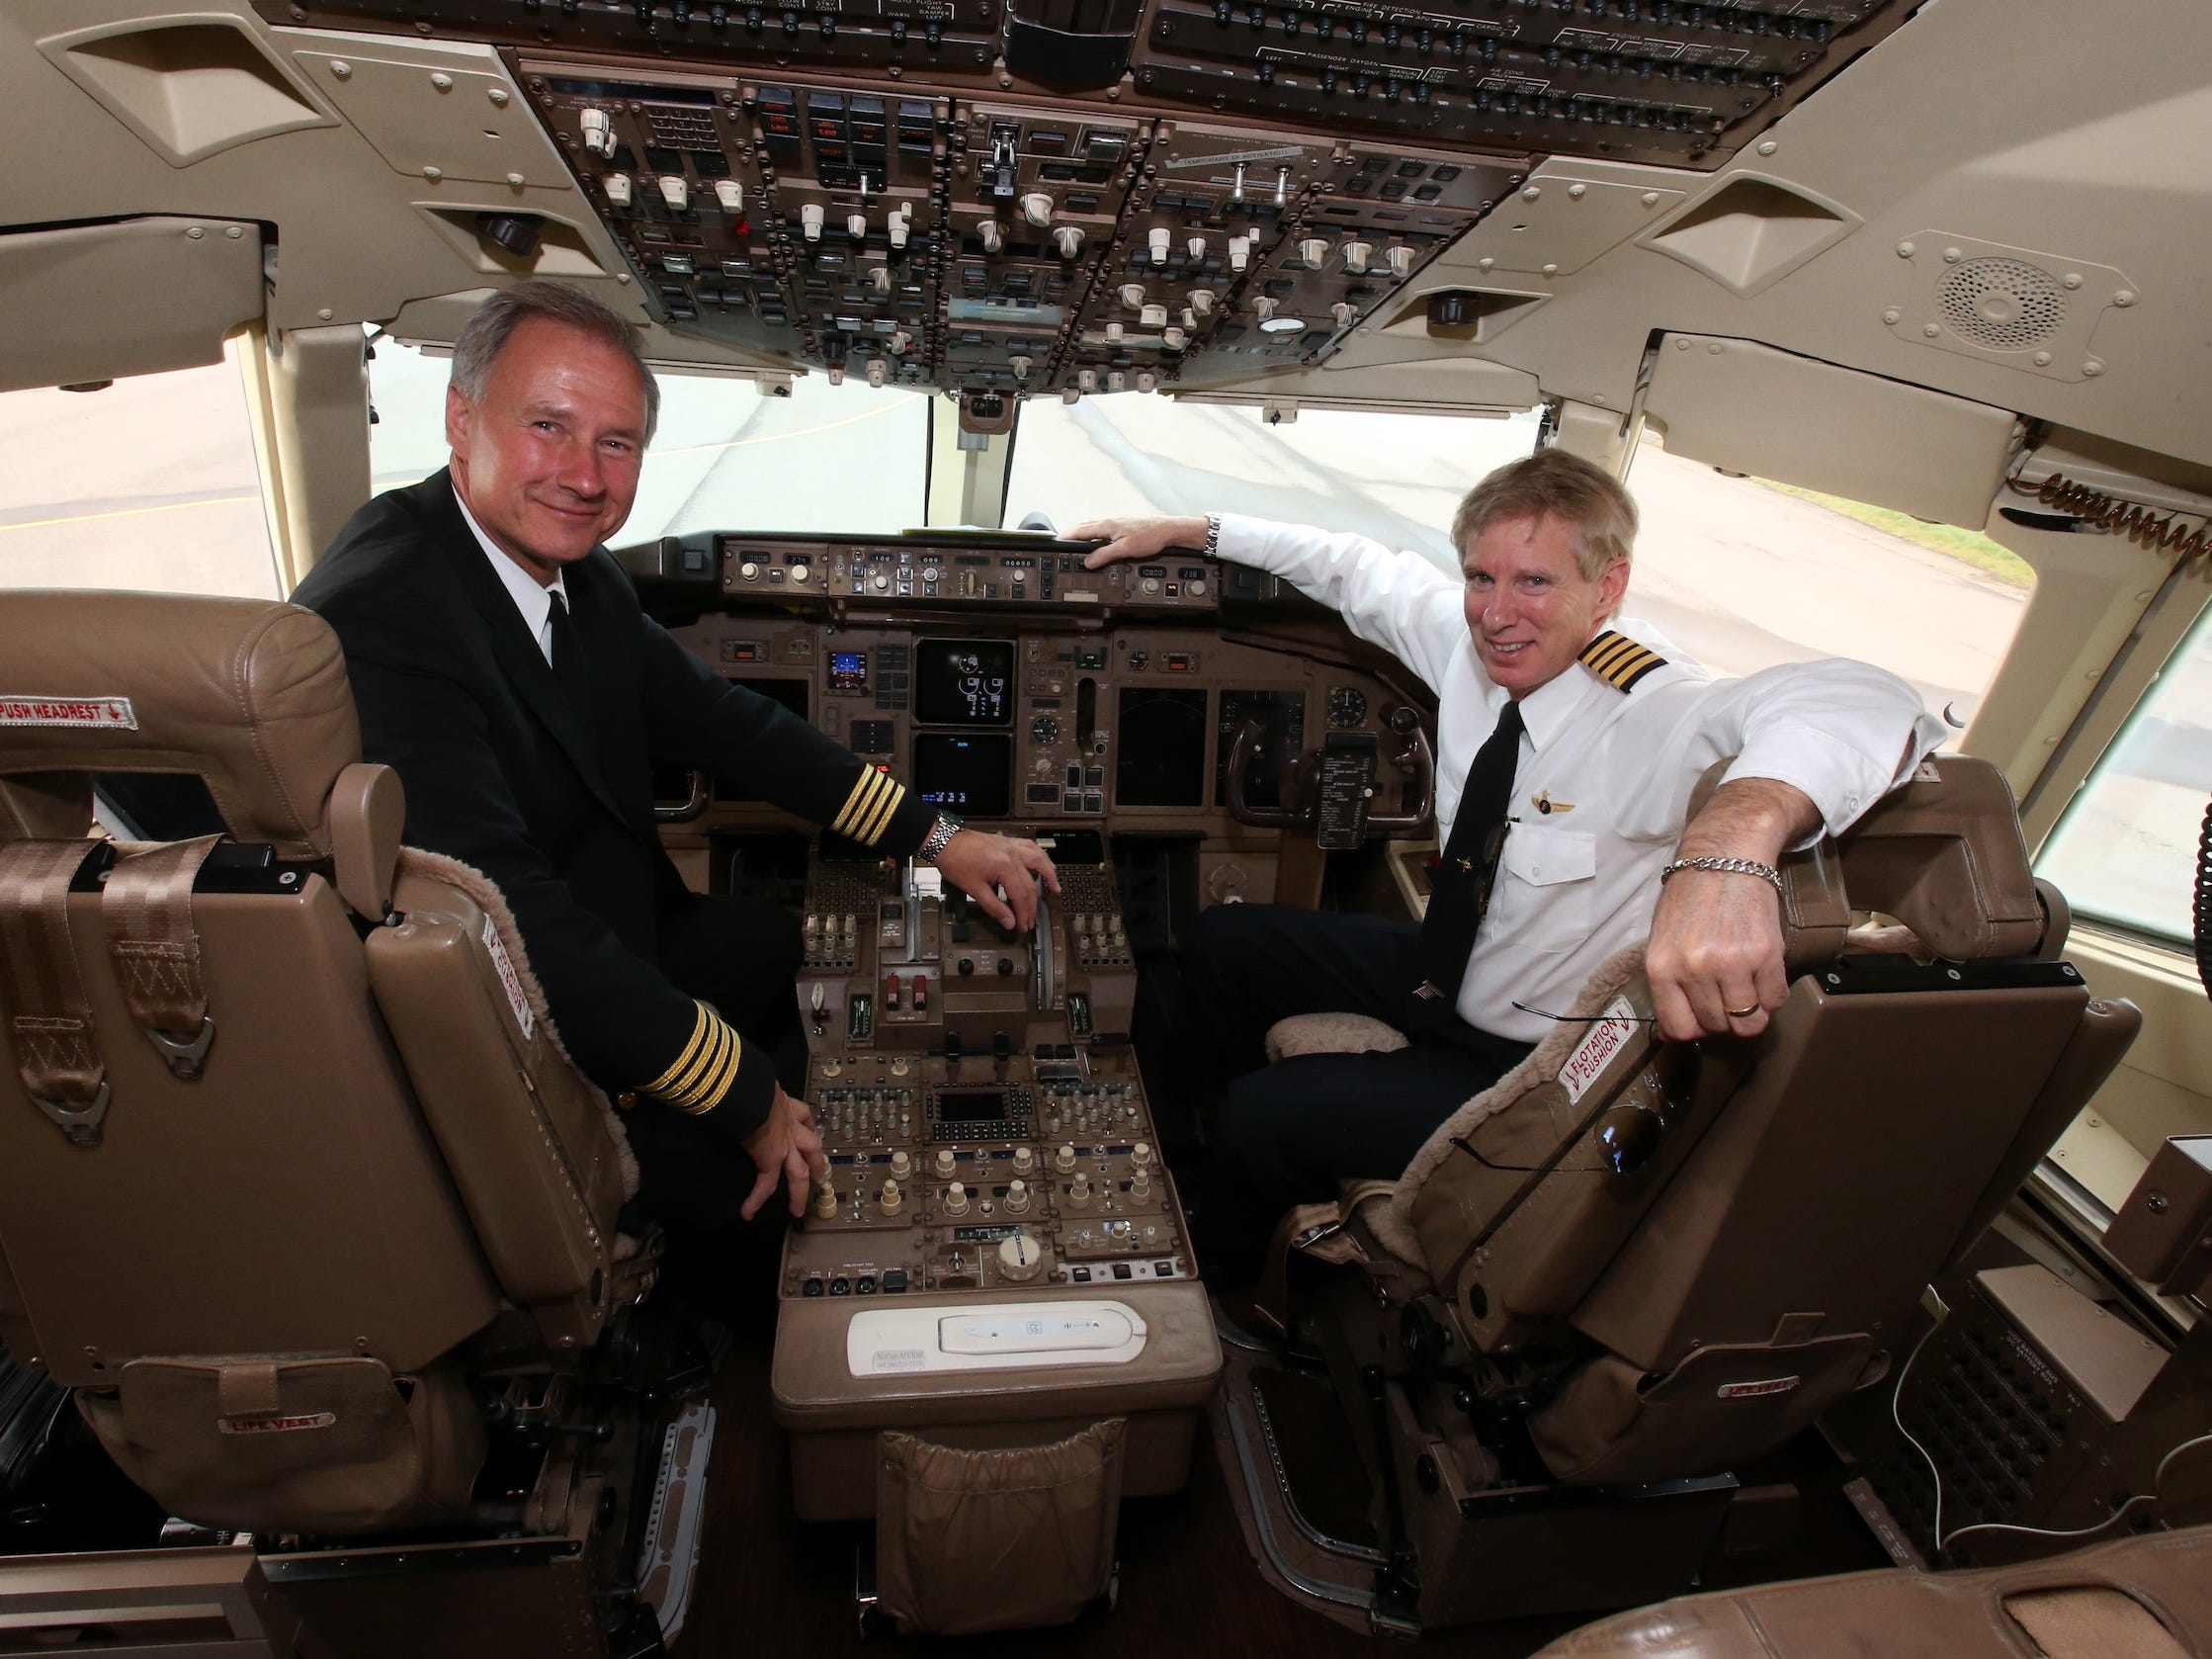 Trump's personal pilots in the 757 cockpit.